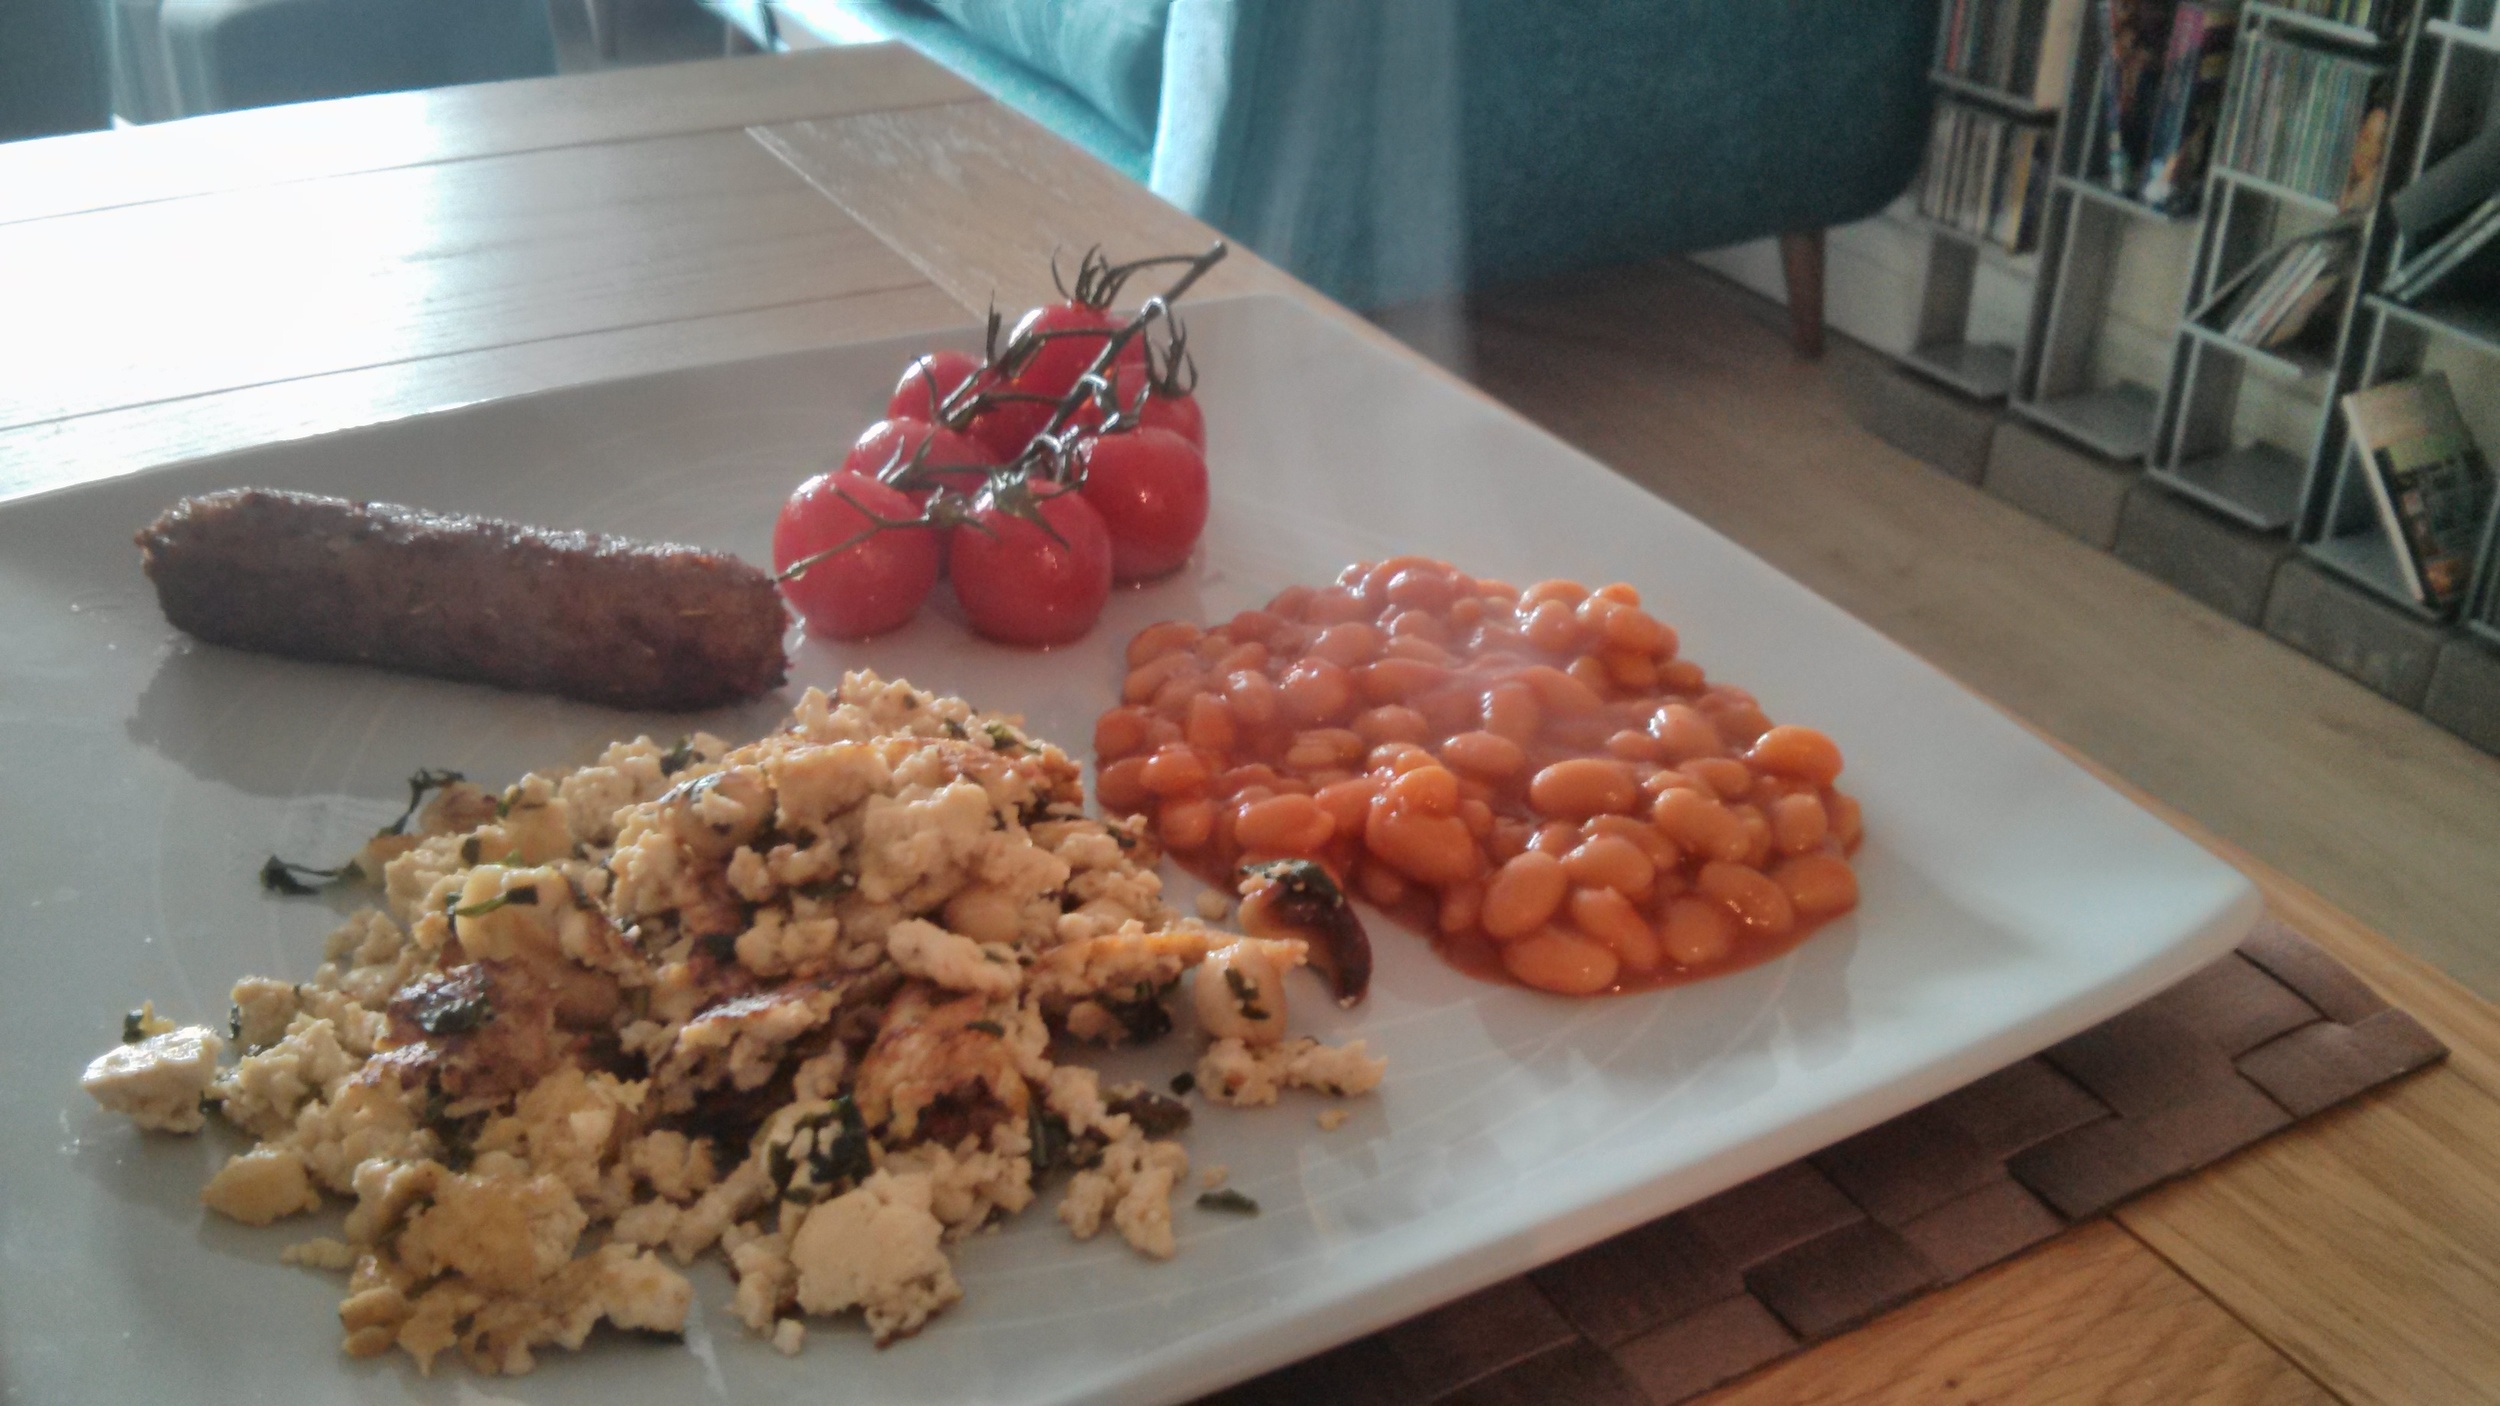 Link to a vegan alternative to a traditional English breakfast